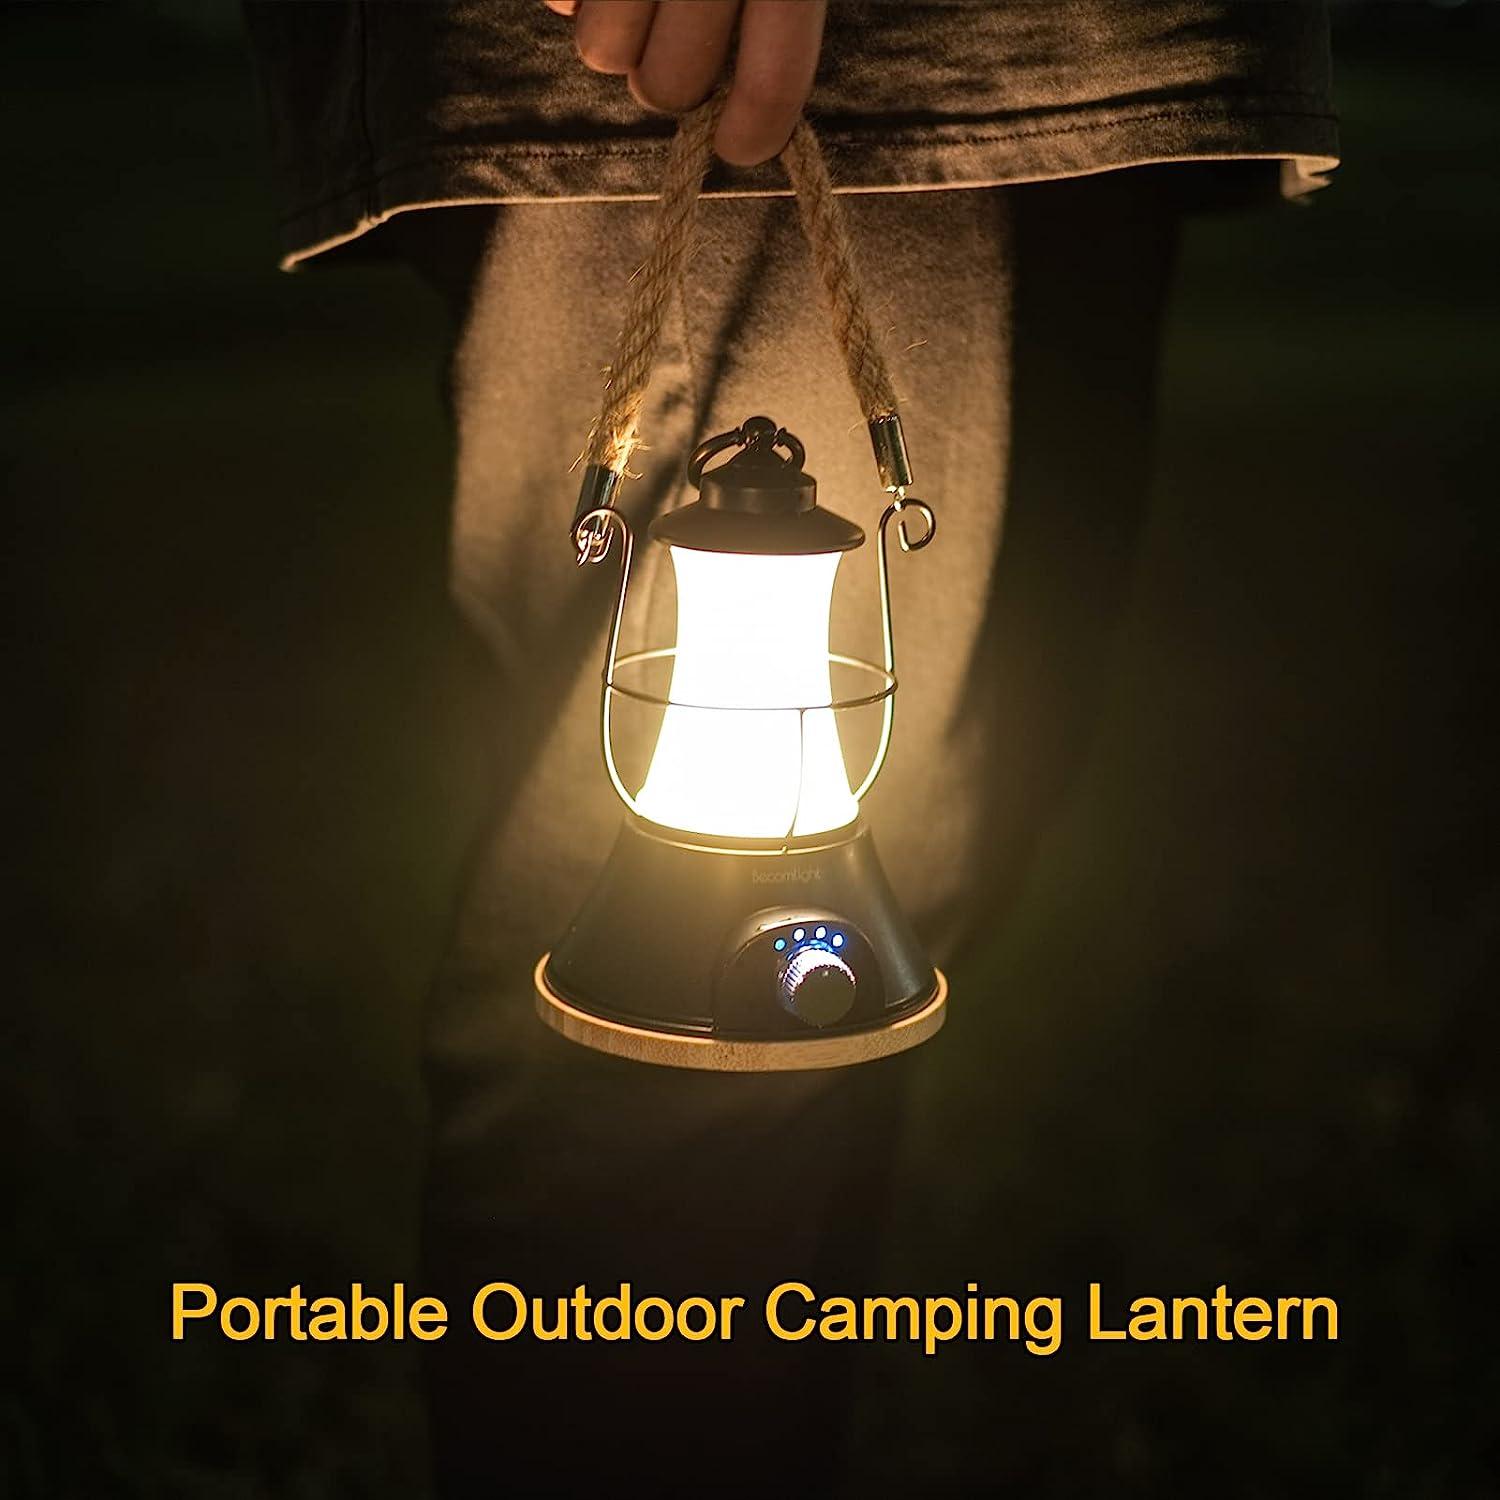 LED Camping Lantern Rechargeable 30008000K: Cute Retro Handheld Portable  Lanterns Outdoor, 5000mAh Battery Powered Dimmable Emergency Lamp for Home  Power Outages, Hurricane Lighting (Black) M9 - Black